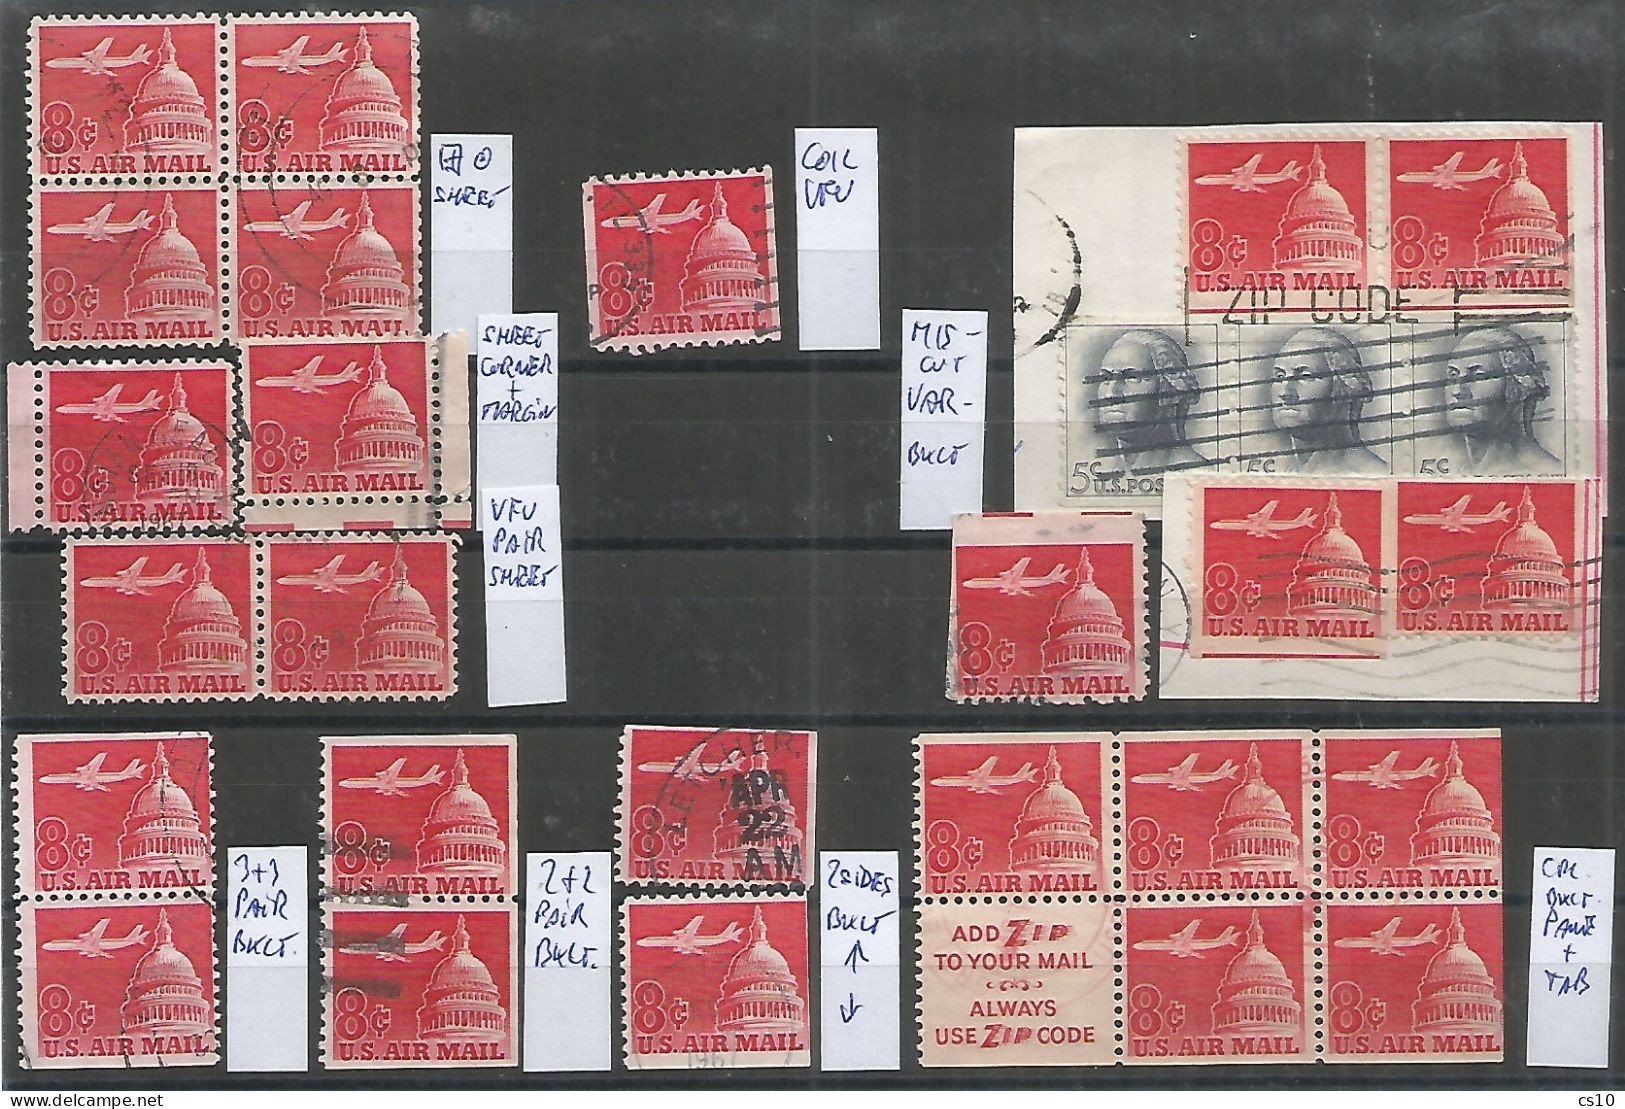 USA Airmail 1962 Jet & Capitol Dome SC# C64+65 Cpl Issue BL4 Sheet Coil Booklet Pane Pairs & Singles + Small Variety - Roulettes